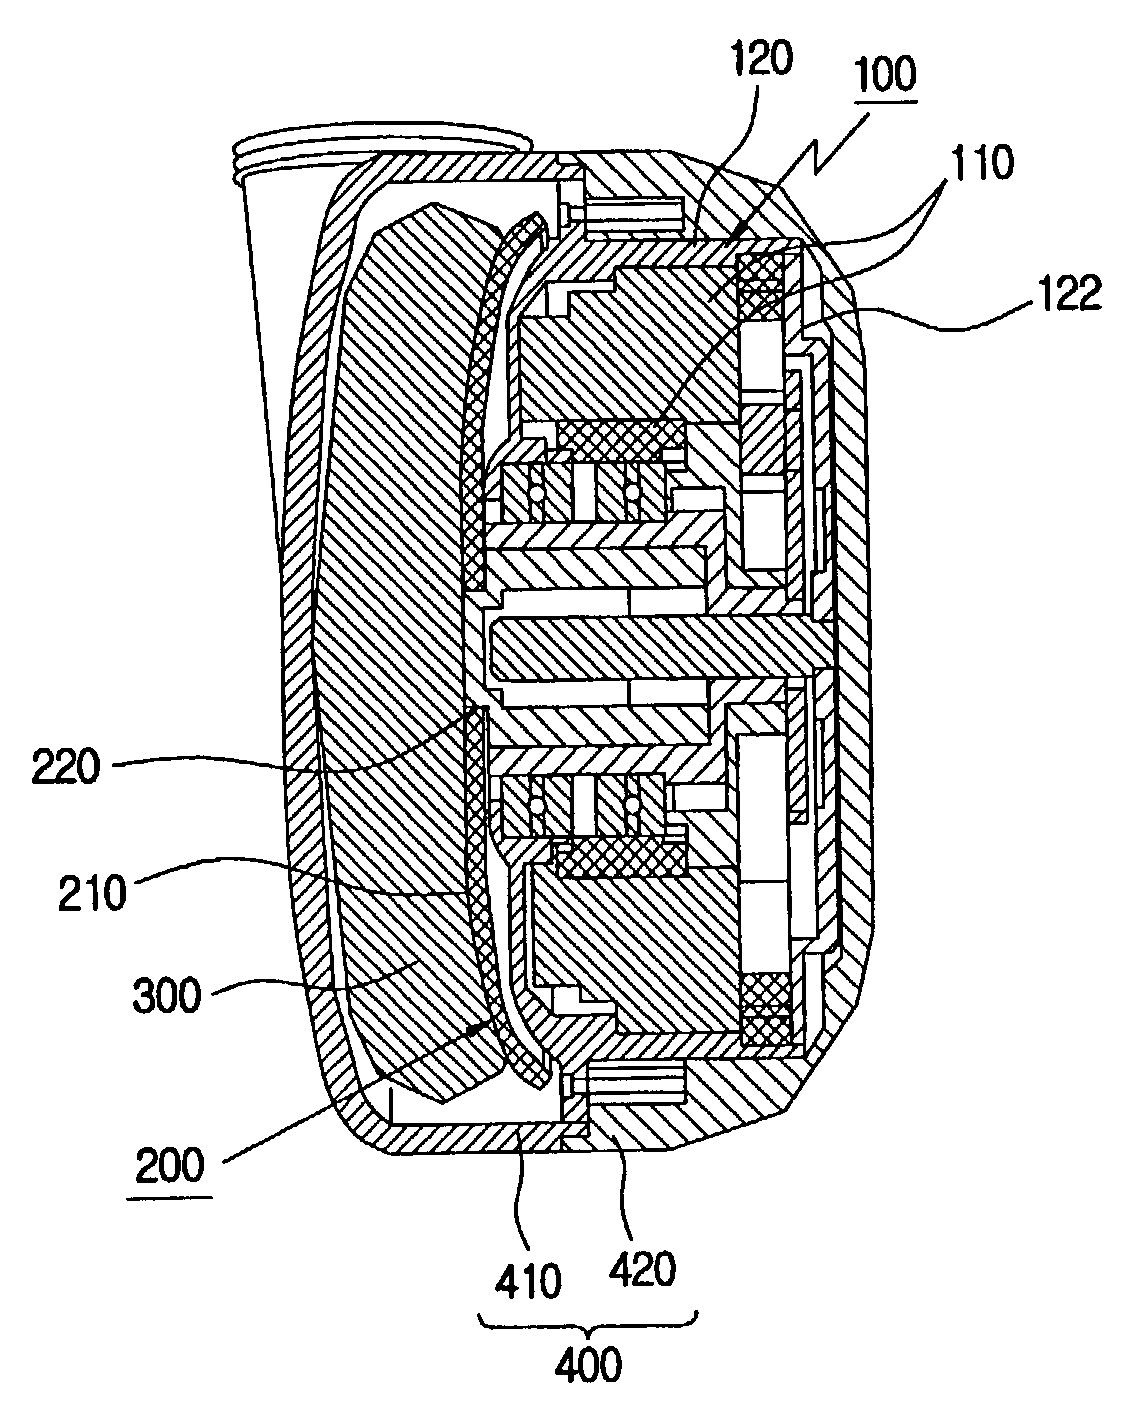 Implantable left ventricular assist device with cylindrical cam